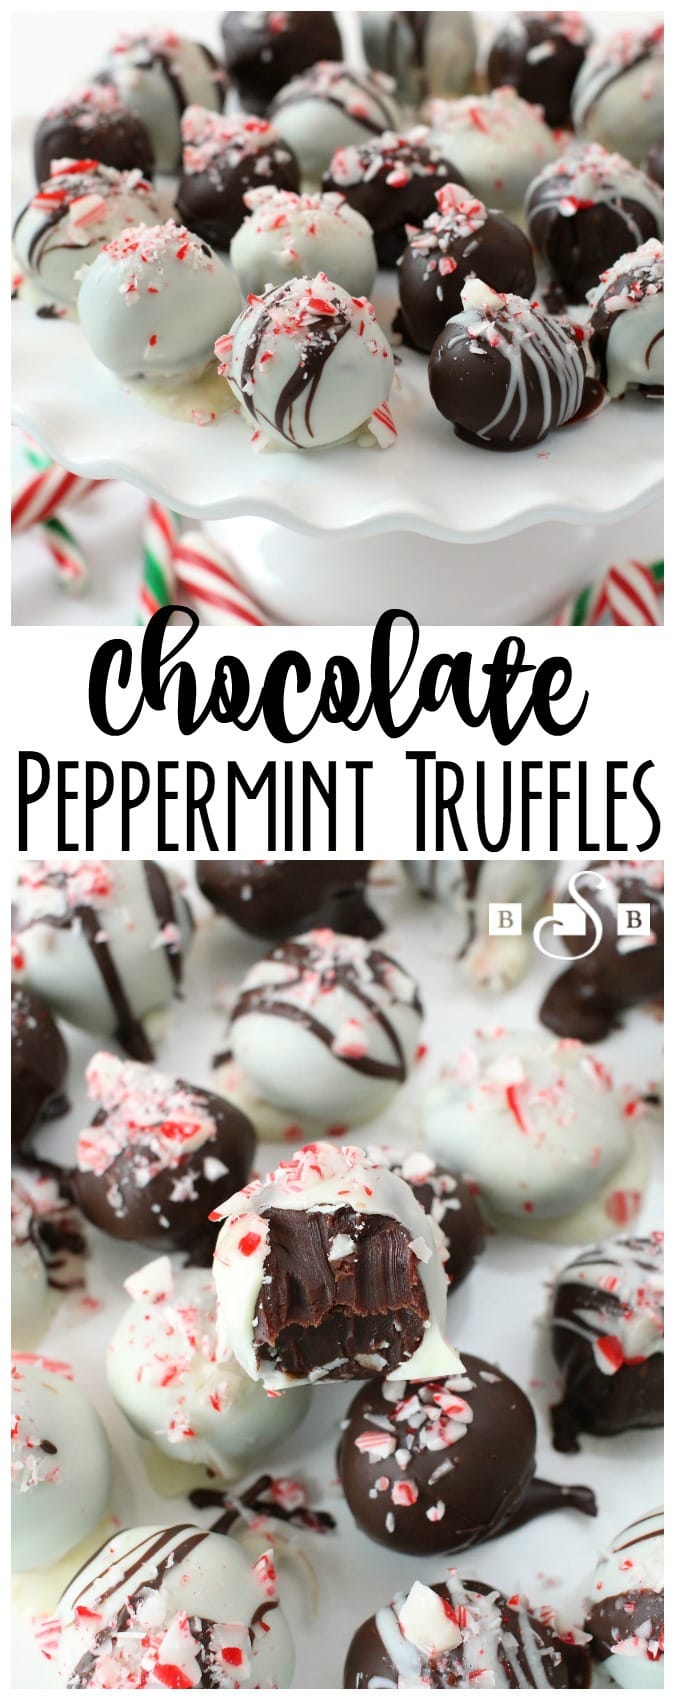 Truffles are a great holiday treat and these ones are no exception! The peppermint and chocolate flavors are so tasty together and always make us want more!